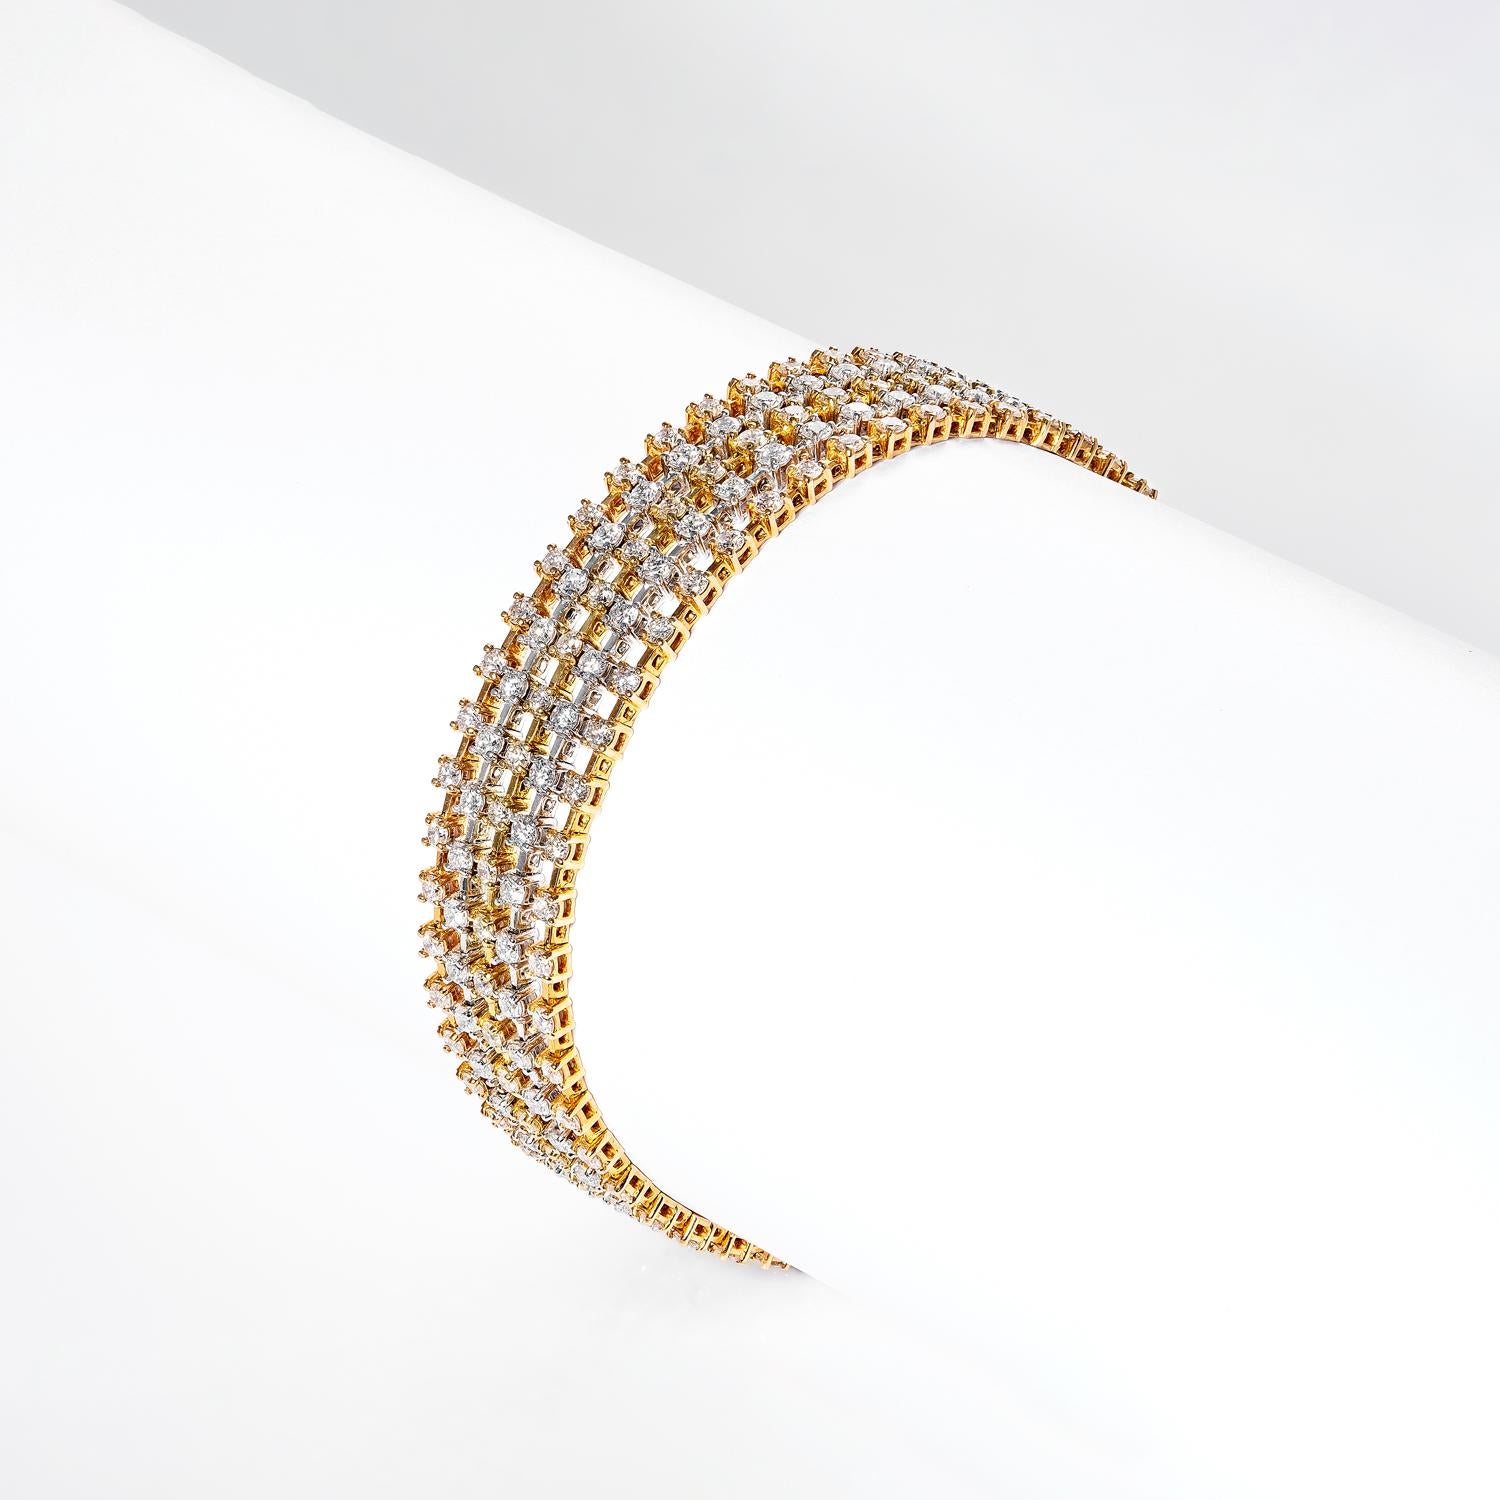 This Jazmin 7 Carat 5 Strand Diamond Bracelet is a breathtaking piece of jewelry, crafted with luxurious 18K yellow gold and intricate diamond detailing. Featuring a total of 250 diamonds, this bracelet truly stands out in a crowd. Stunning and